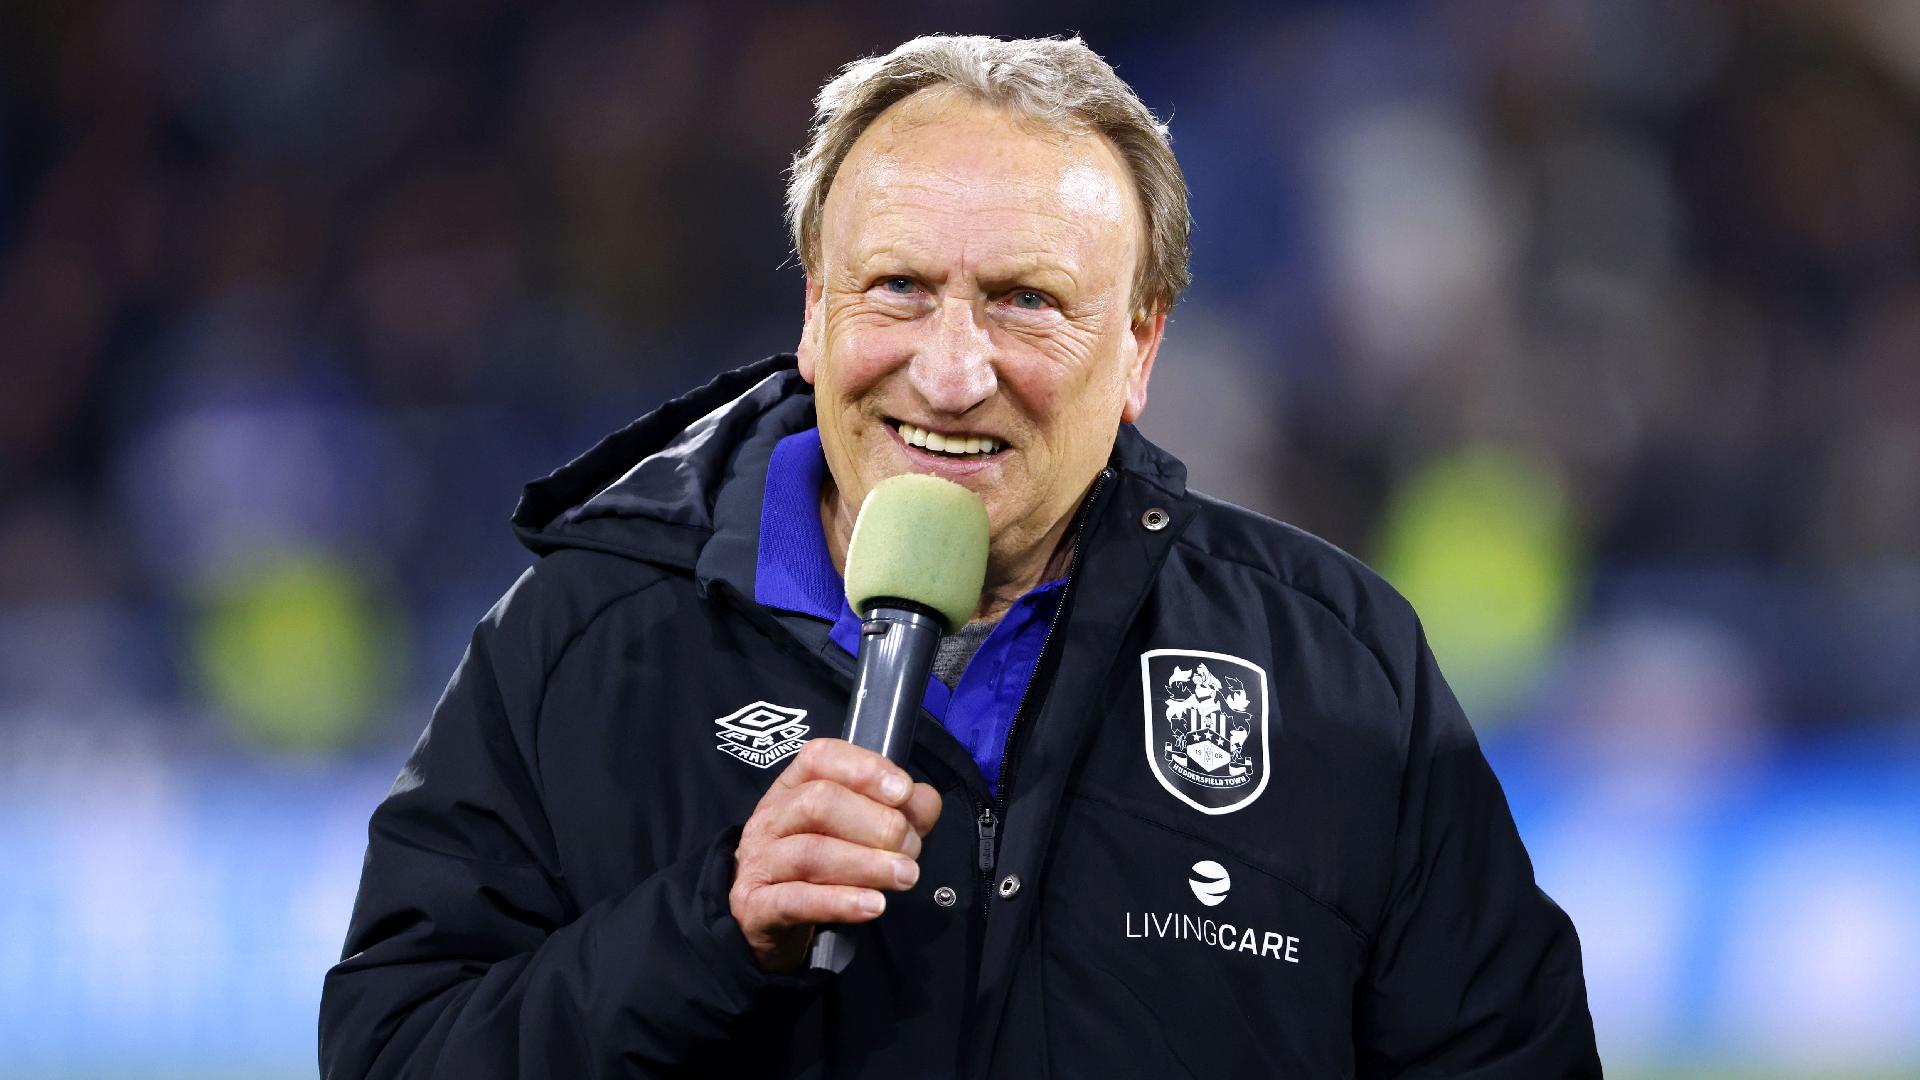 Neil Warnock proud of his work as he departs Huddersfield after draw with Stoke